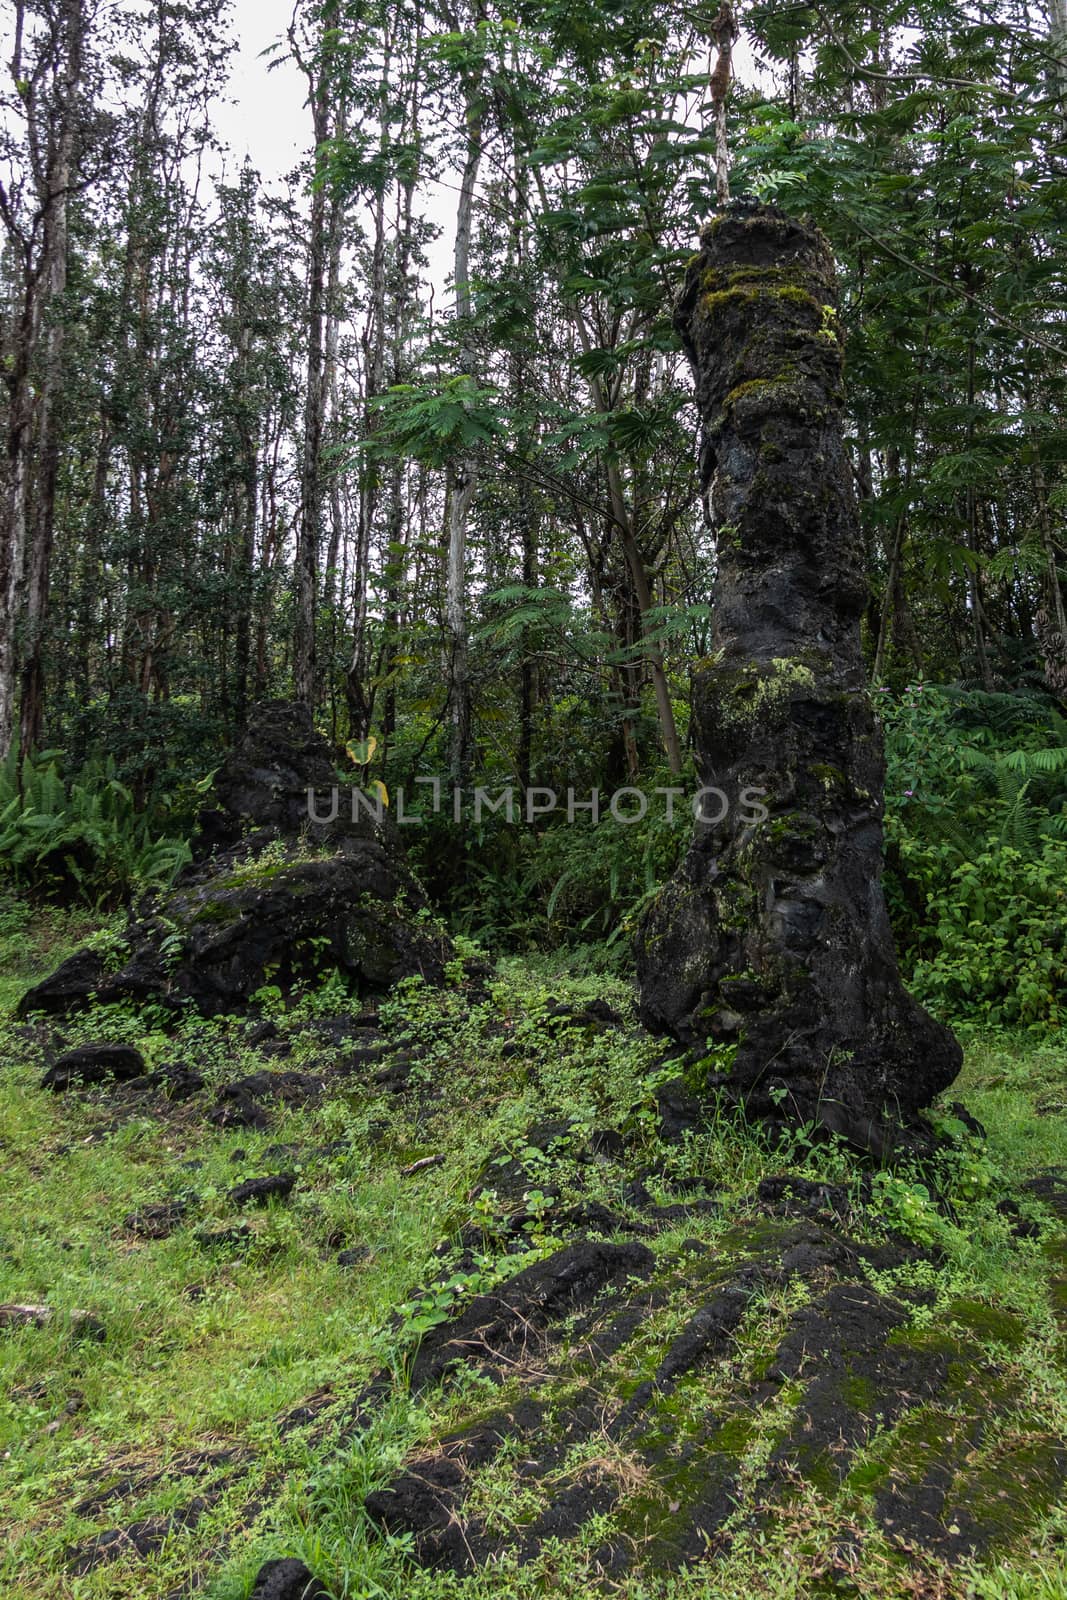 Lava tree and lava hills in green park, Leilani Estates, Hawaii, by Claudine